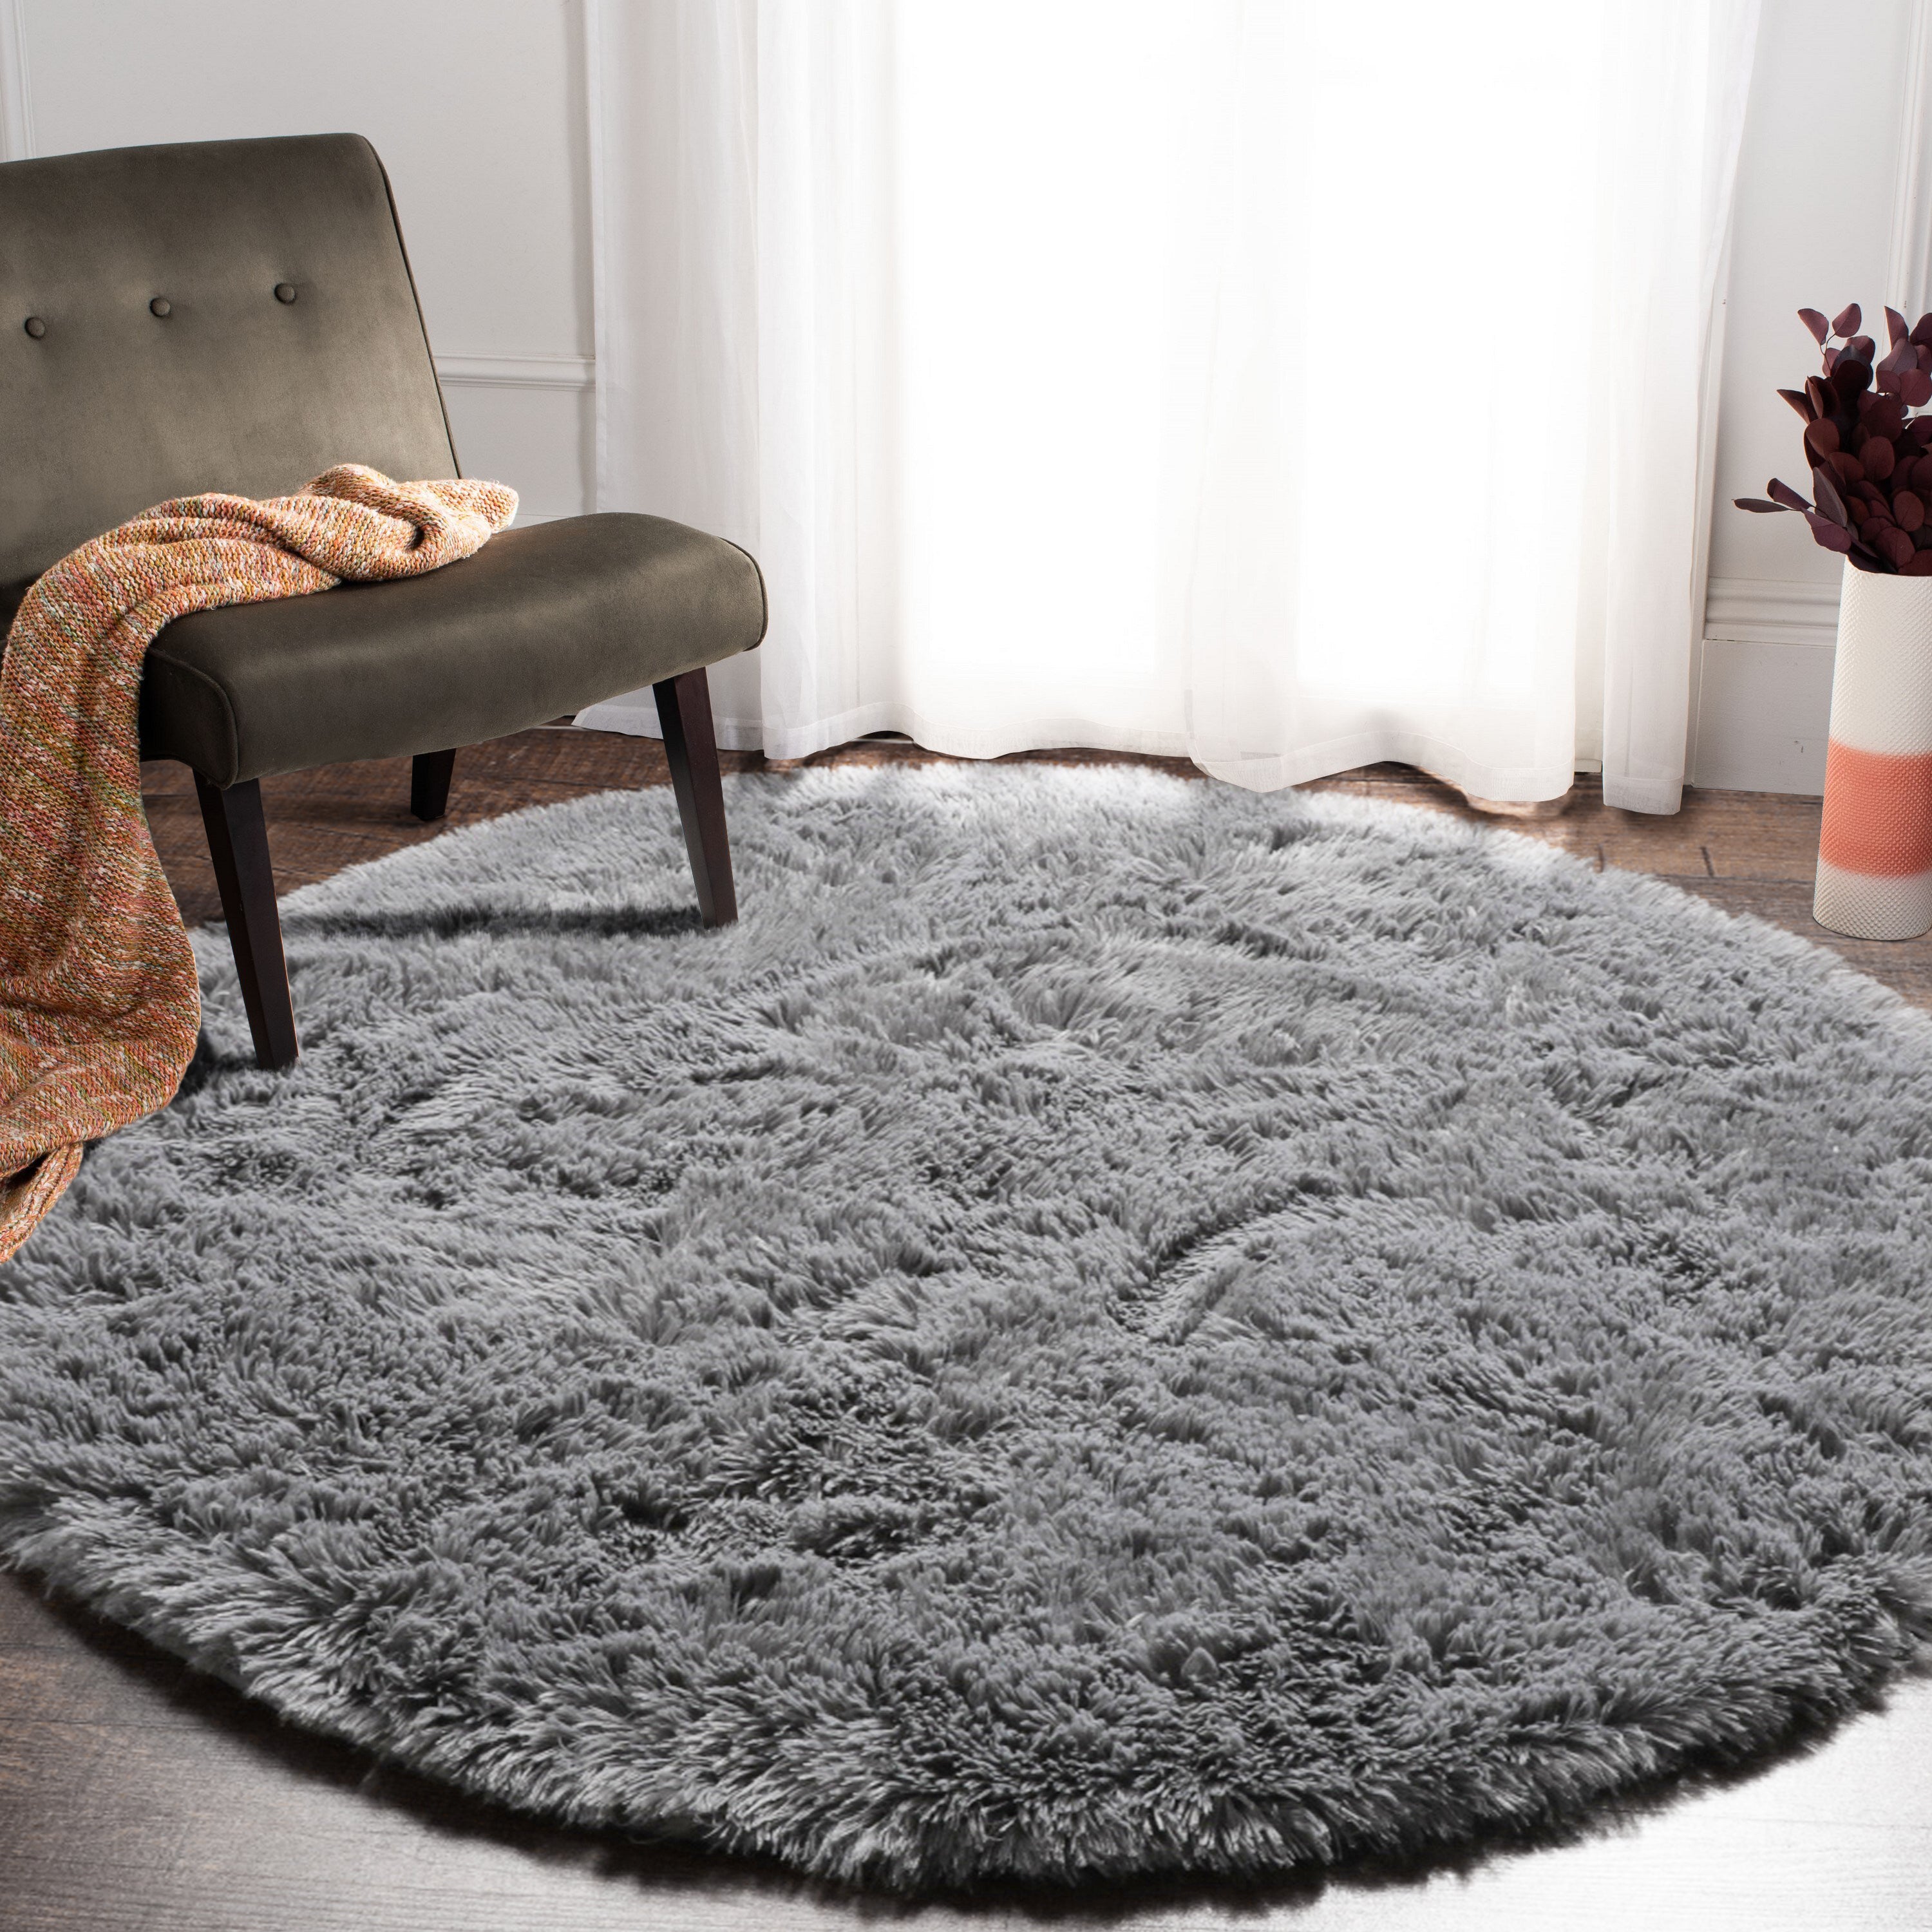 for Kids RoomSoft Plush Gray Round Area Rug